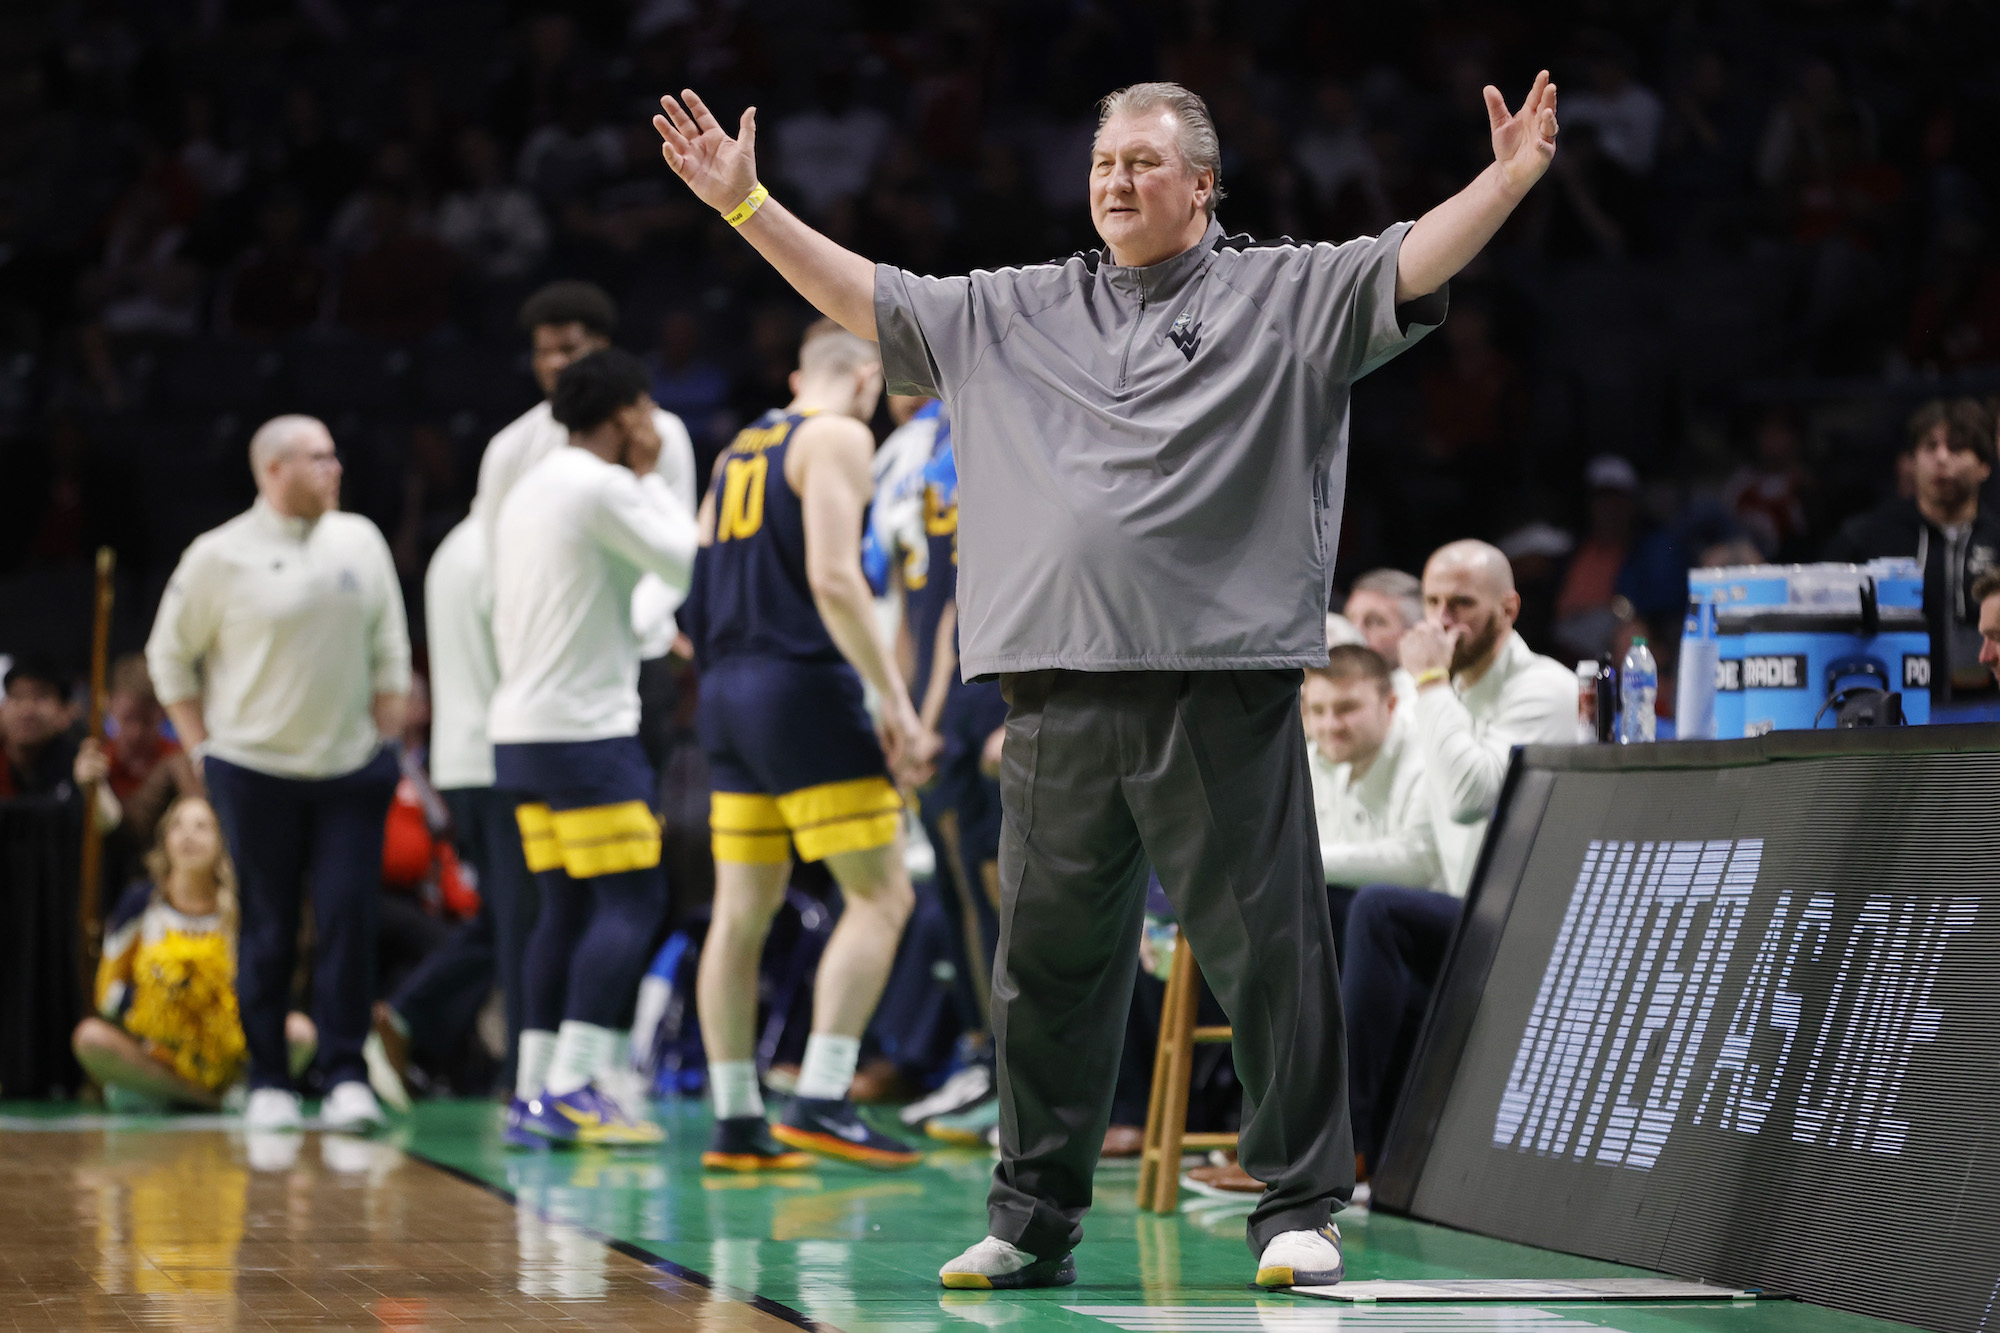 BIRMINGHAM, ALABAMA - MARCH 16: Head coach Bob Huggins of the West Virginia Mountaineers reacts during the second half against the Maryland Terrapins in the first round of the NCAA Men's Basketball Tournament at Legacy Arena at the BJCC on March 16, 2023 in Birmingham, Alabama. (Photo by Alex Slitz/Getty Images)